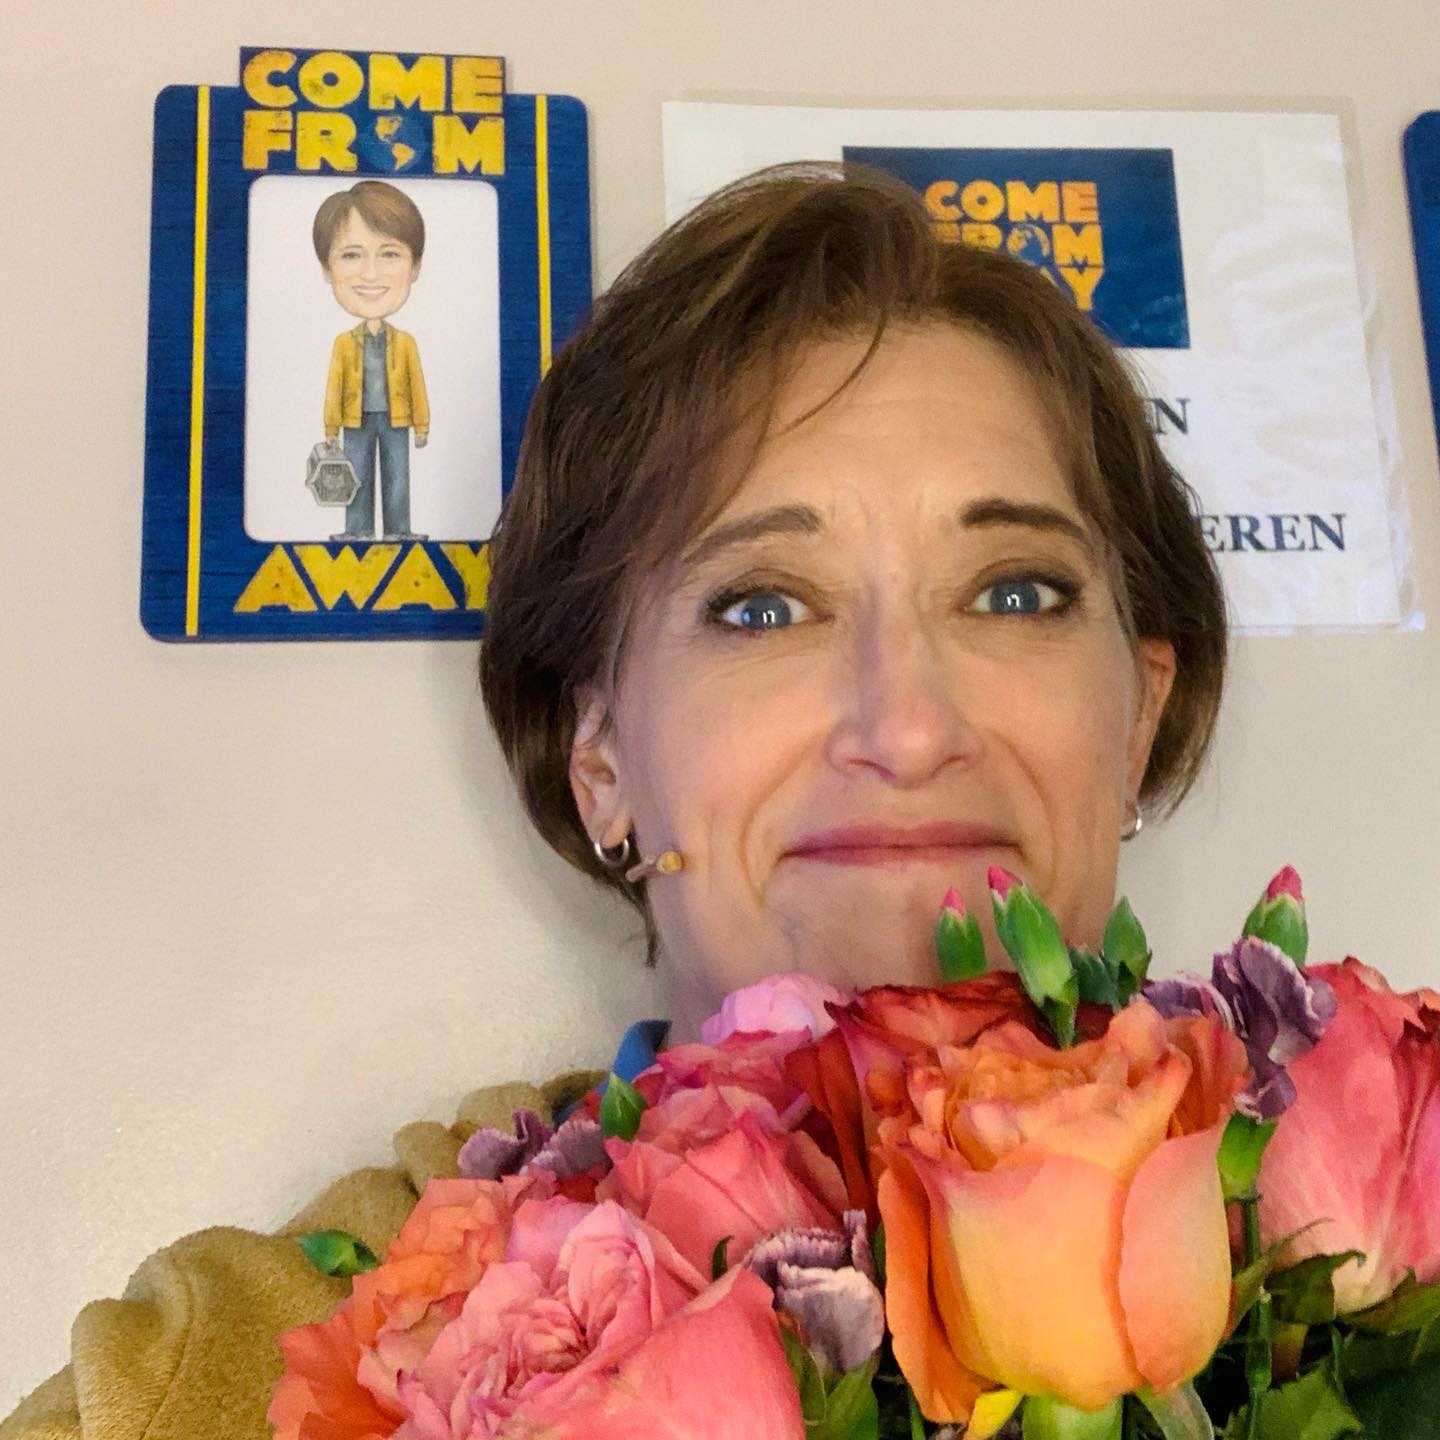 Petrina Bromley holding roses infront of pamphlets of Come From Away